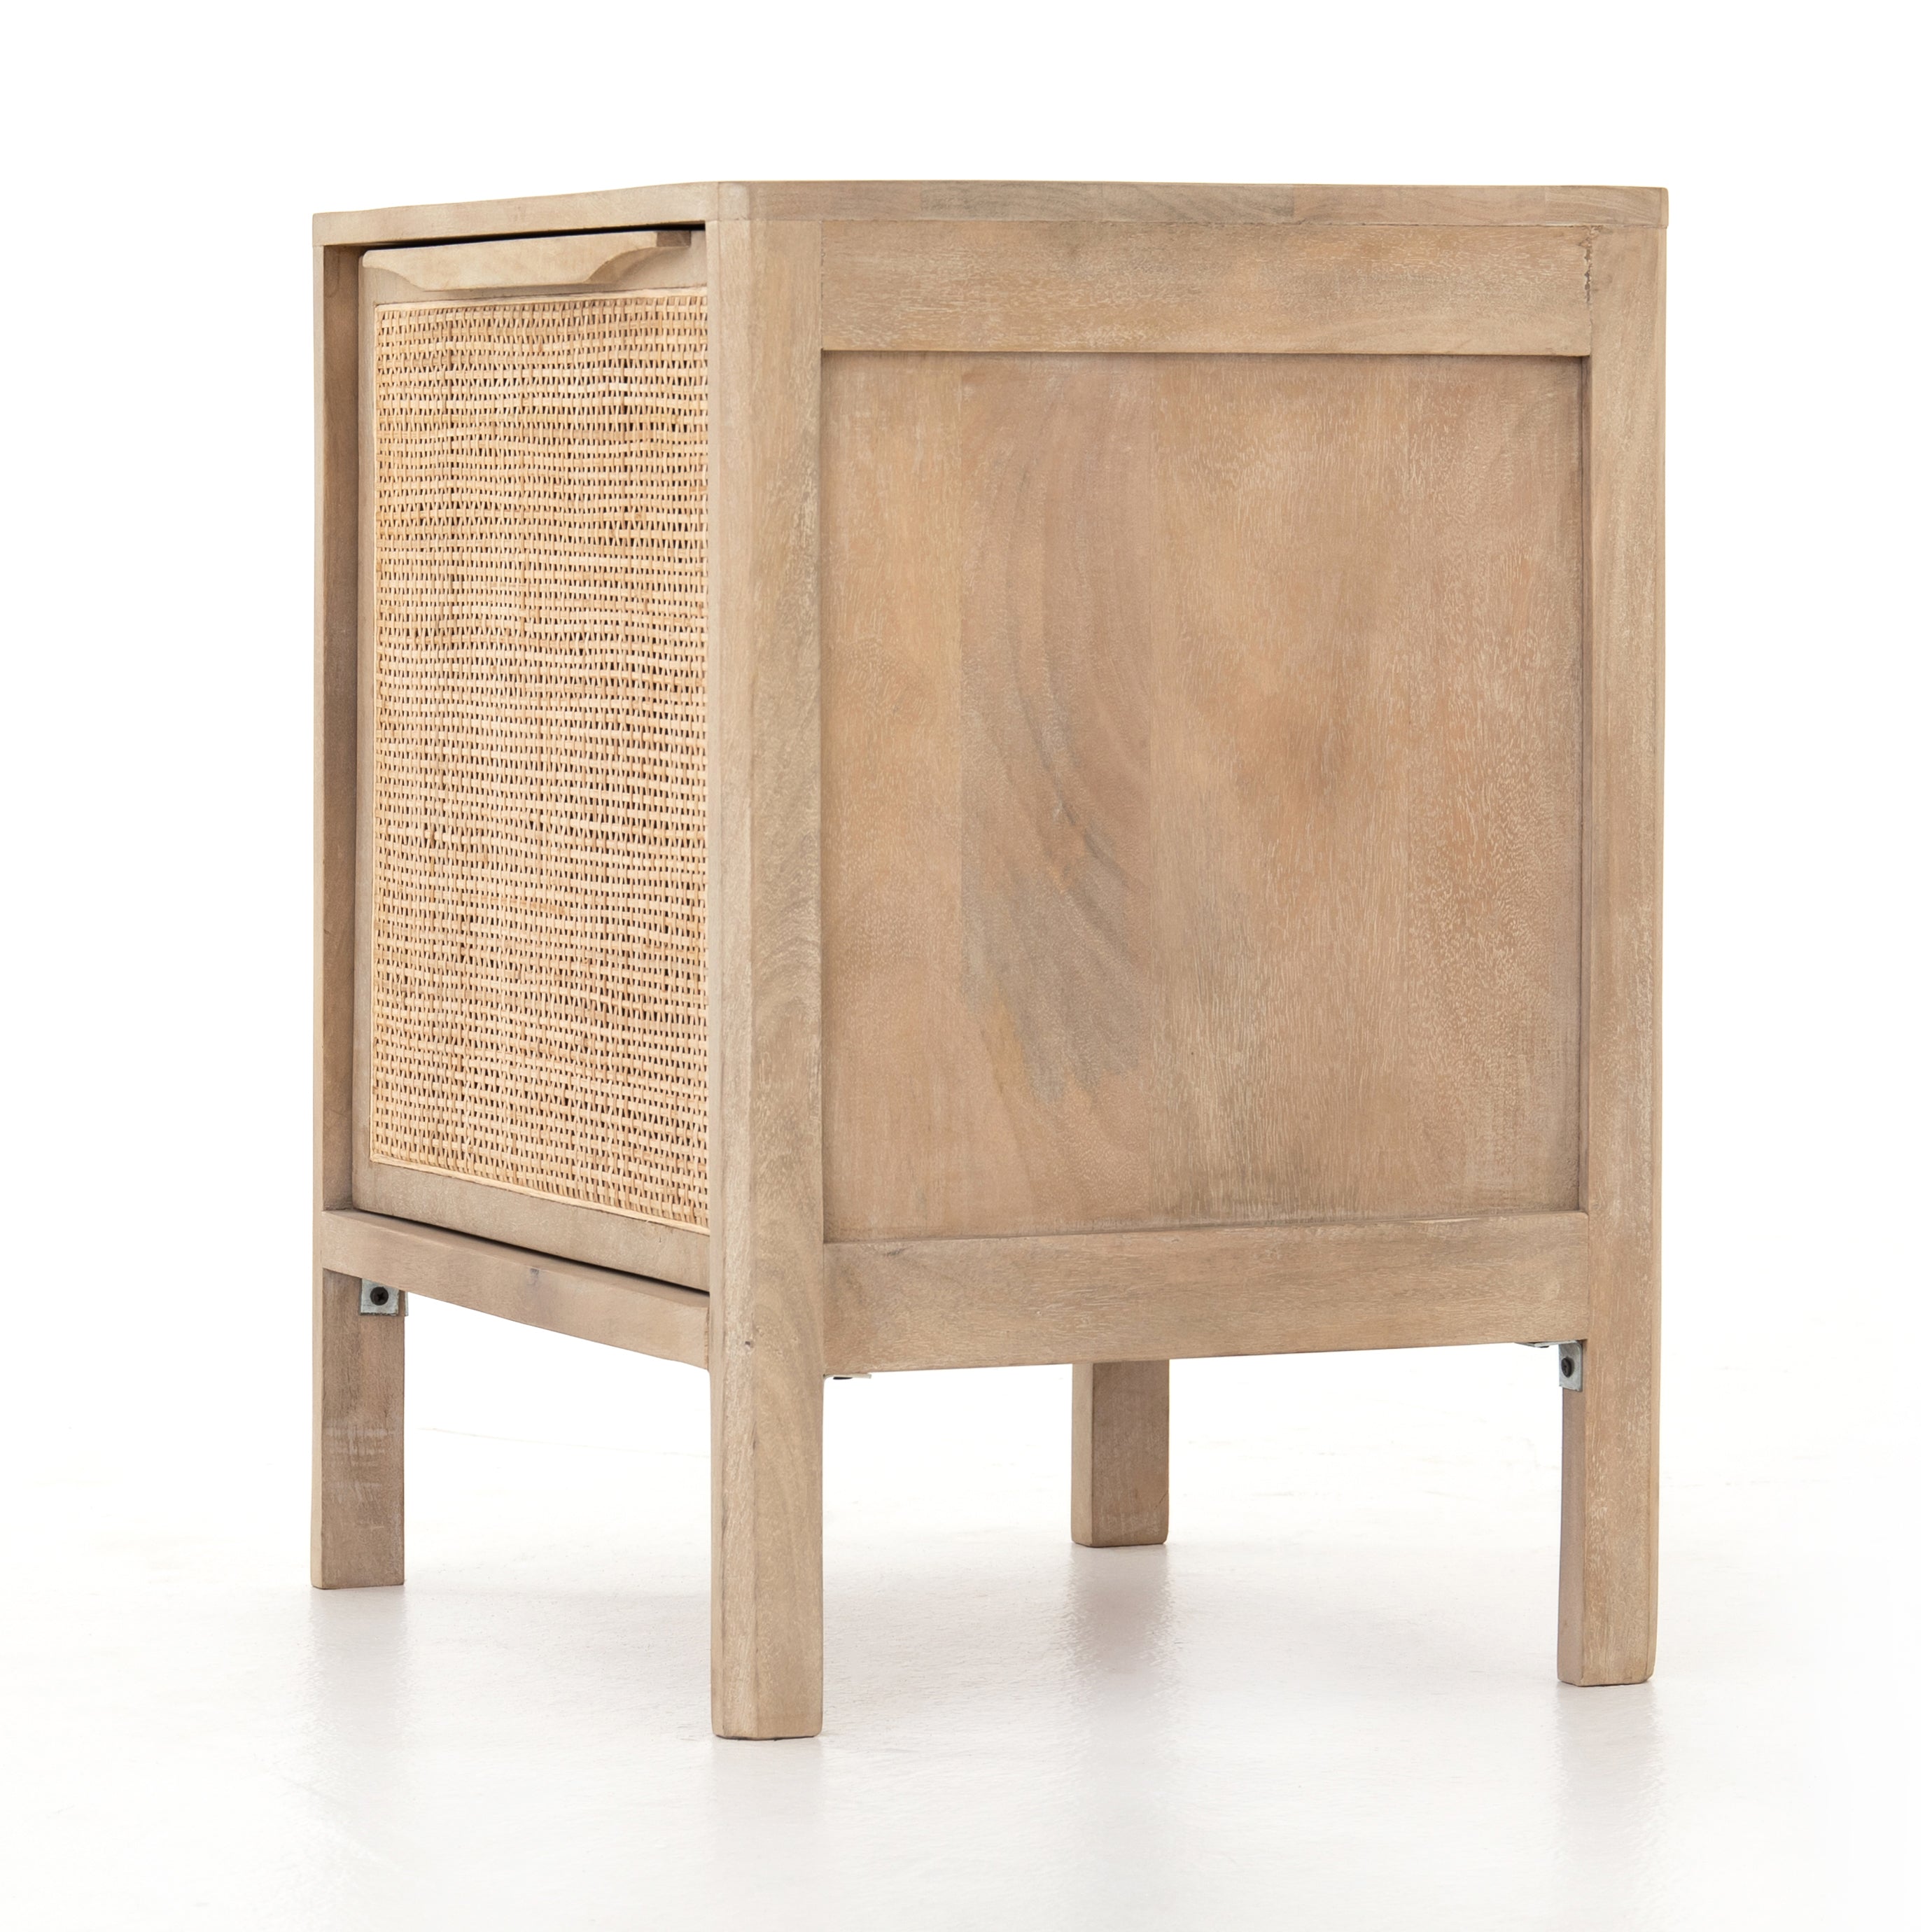 Natural mango frames inset woven cane, for a light, textural look with fresh organic allure. Removable interior shelf for clever convenience. Amethyst Home provides interior design, new construction, custom furniture, and area rugs in the Des Moines metro area.